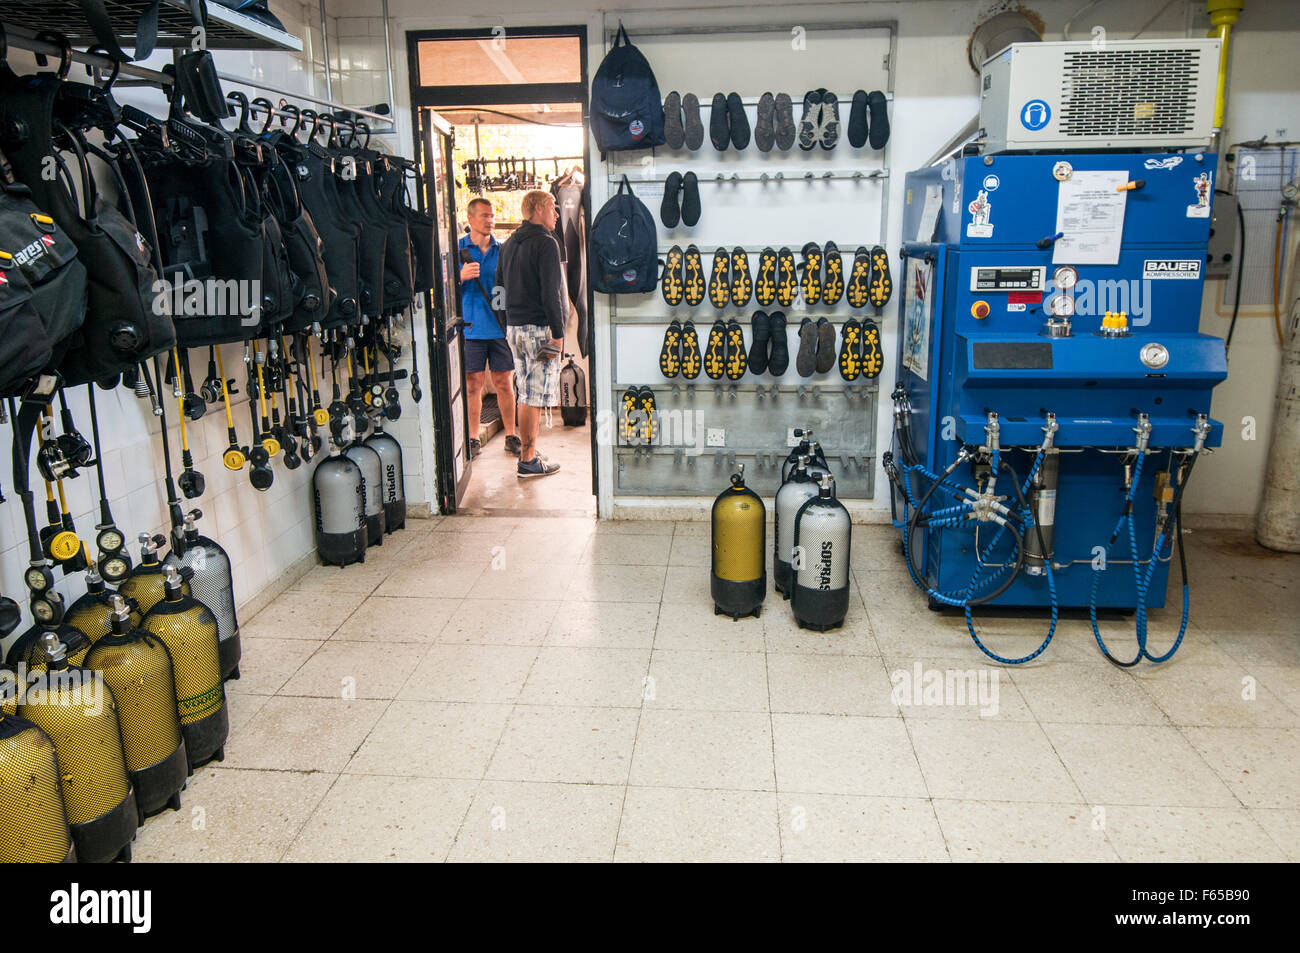 A SCUBA diving club in Larnaca, Cyprus the diving equipment storage room Stock Photo